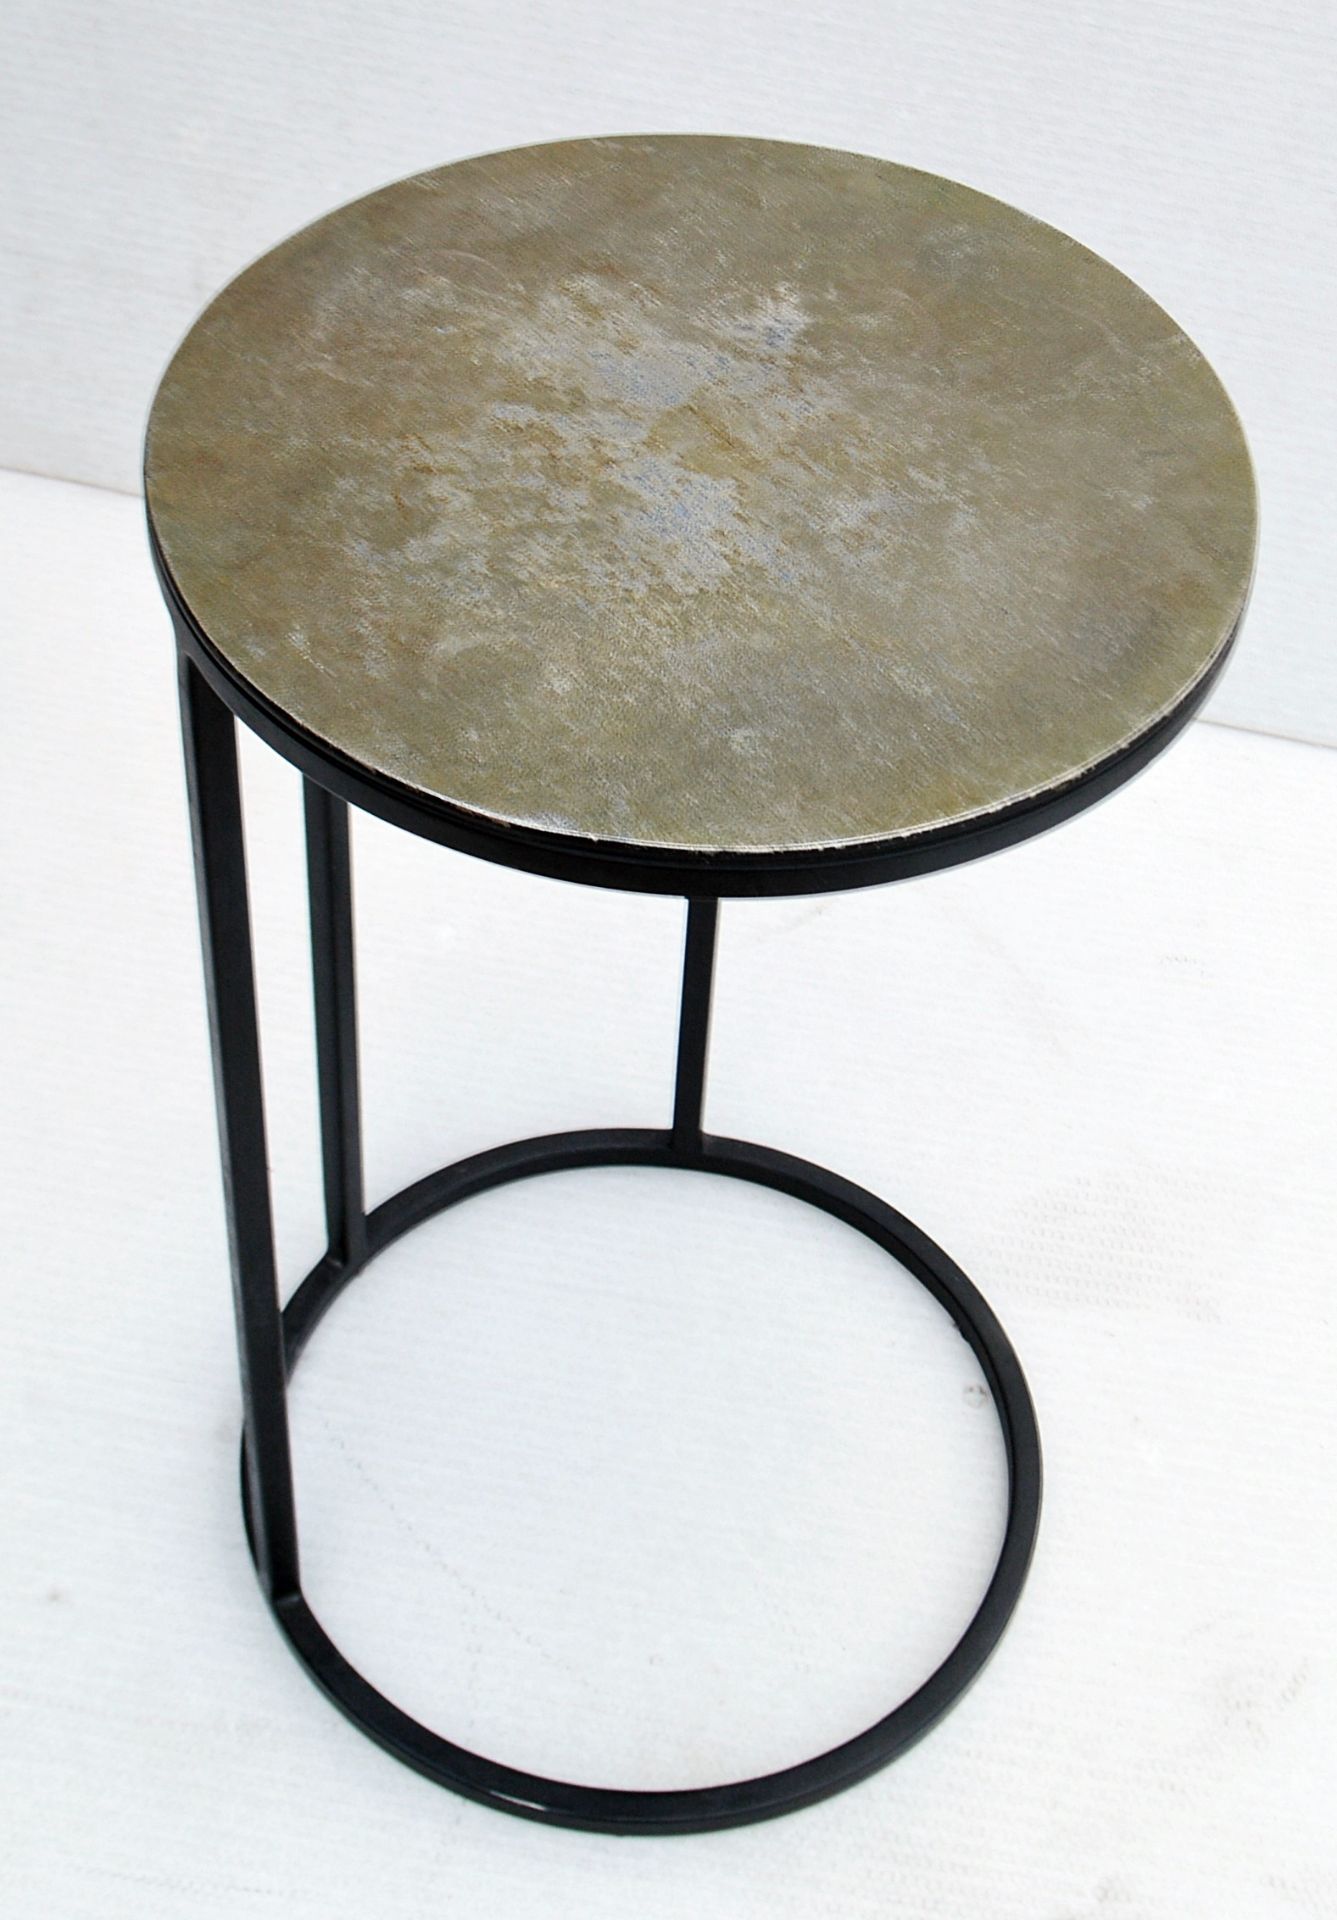 A Pair Of Elegant Circular Side Tables With Slim Metal Bases And Textured Brass Finish - Dimensions: - Image 2 of 4